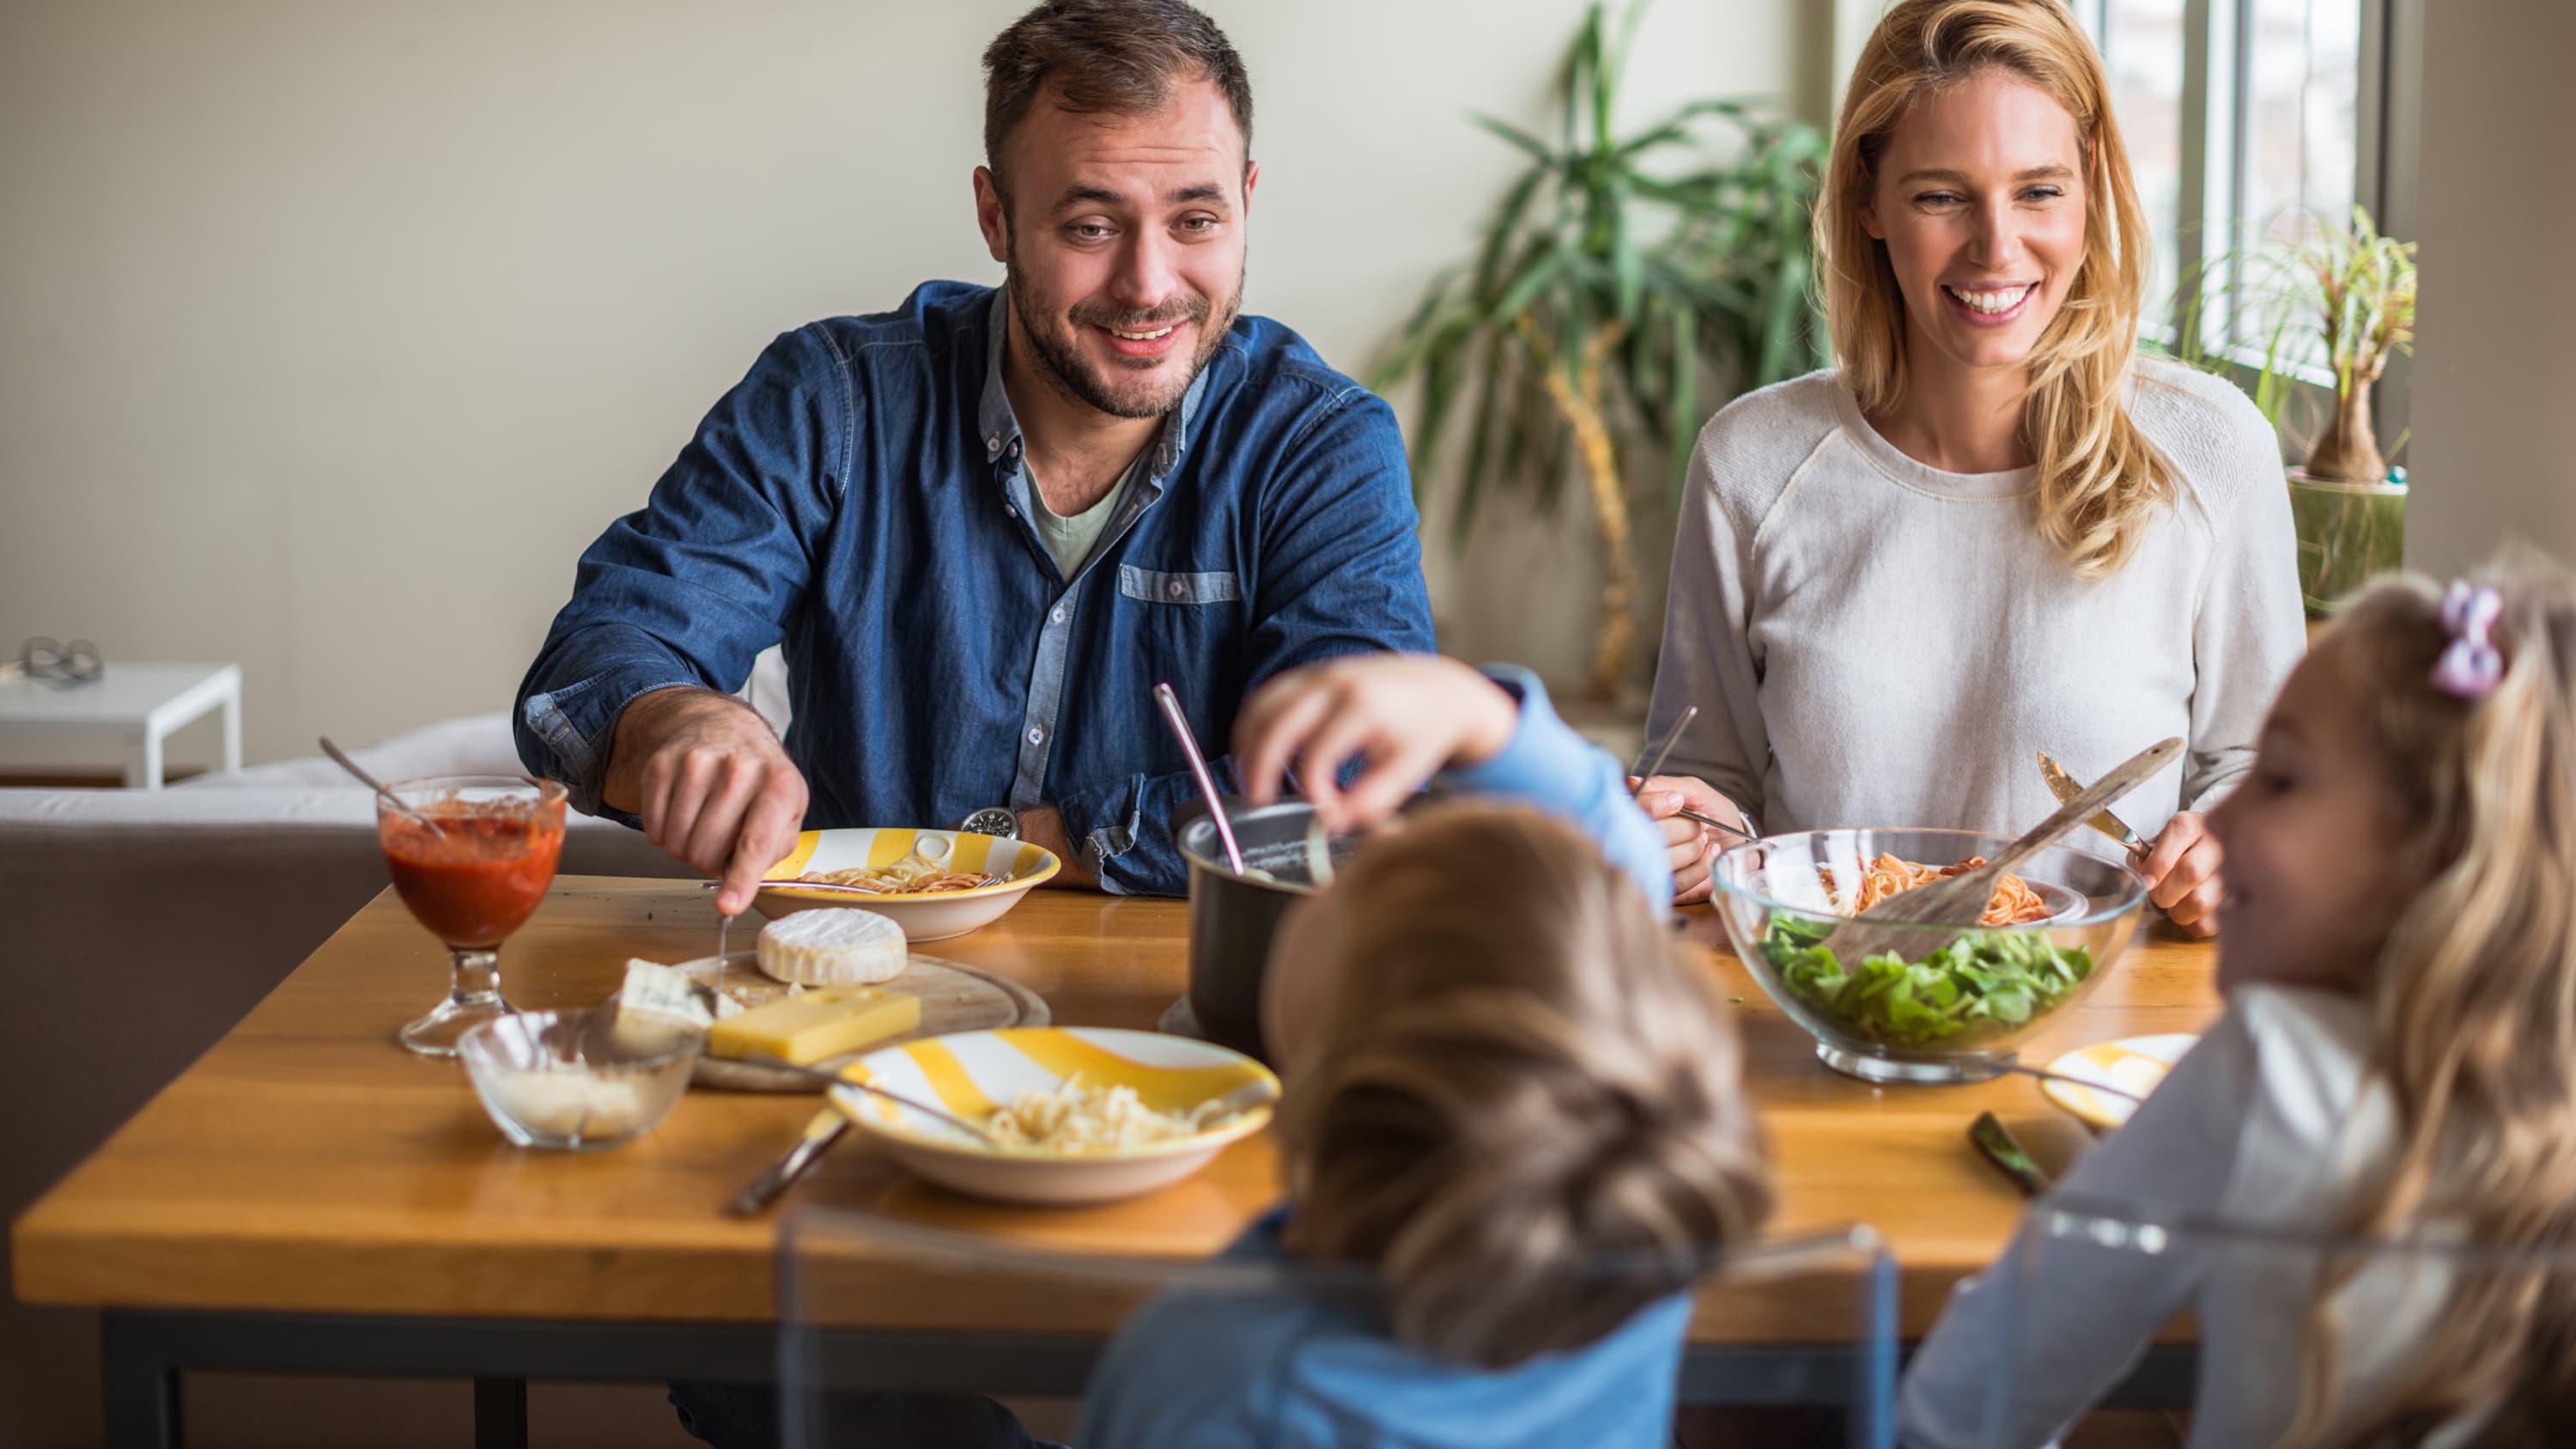 A father who may have had a vasectomy sits down to eat with his wife and children.